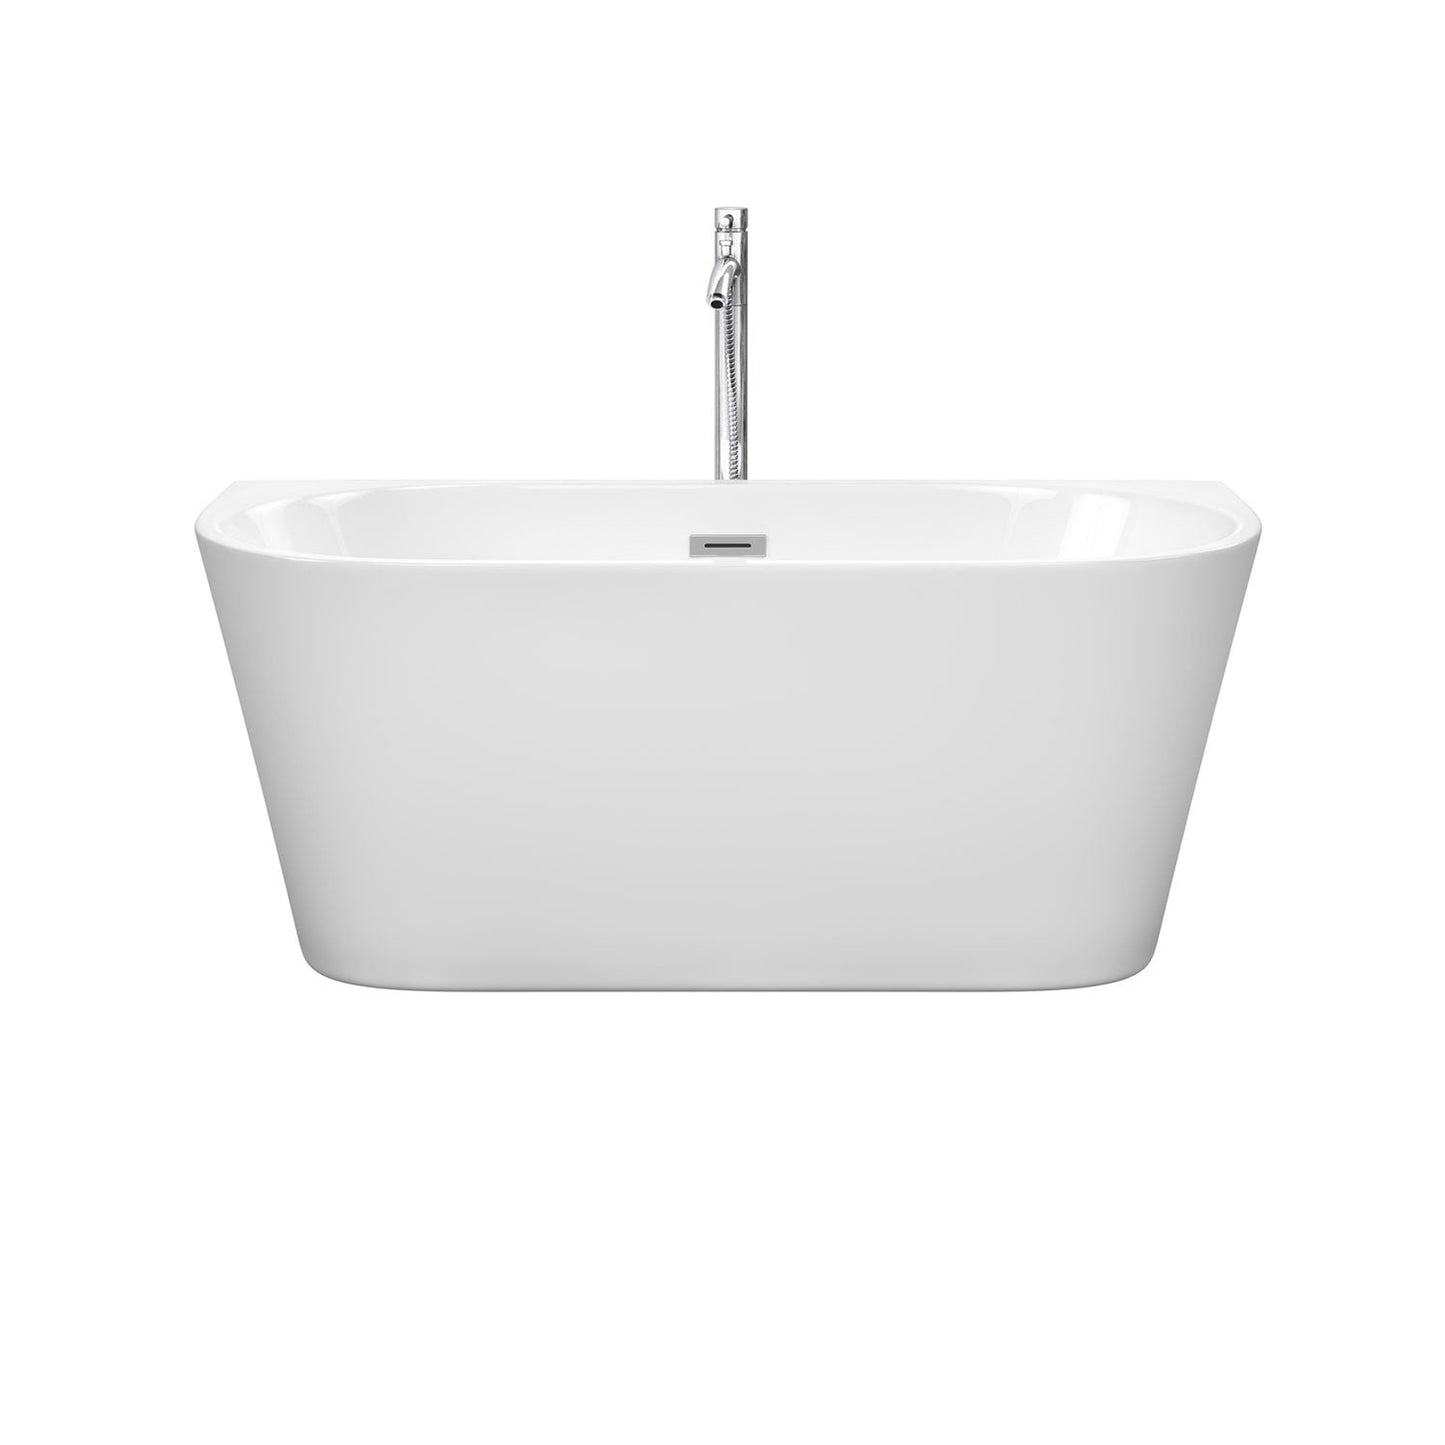 Wyndham Collection Callie 59" Freestanding Bathtub in White With Floor Mounted Faucet, Drain and Overflow Trim in Polished Chrome